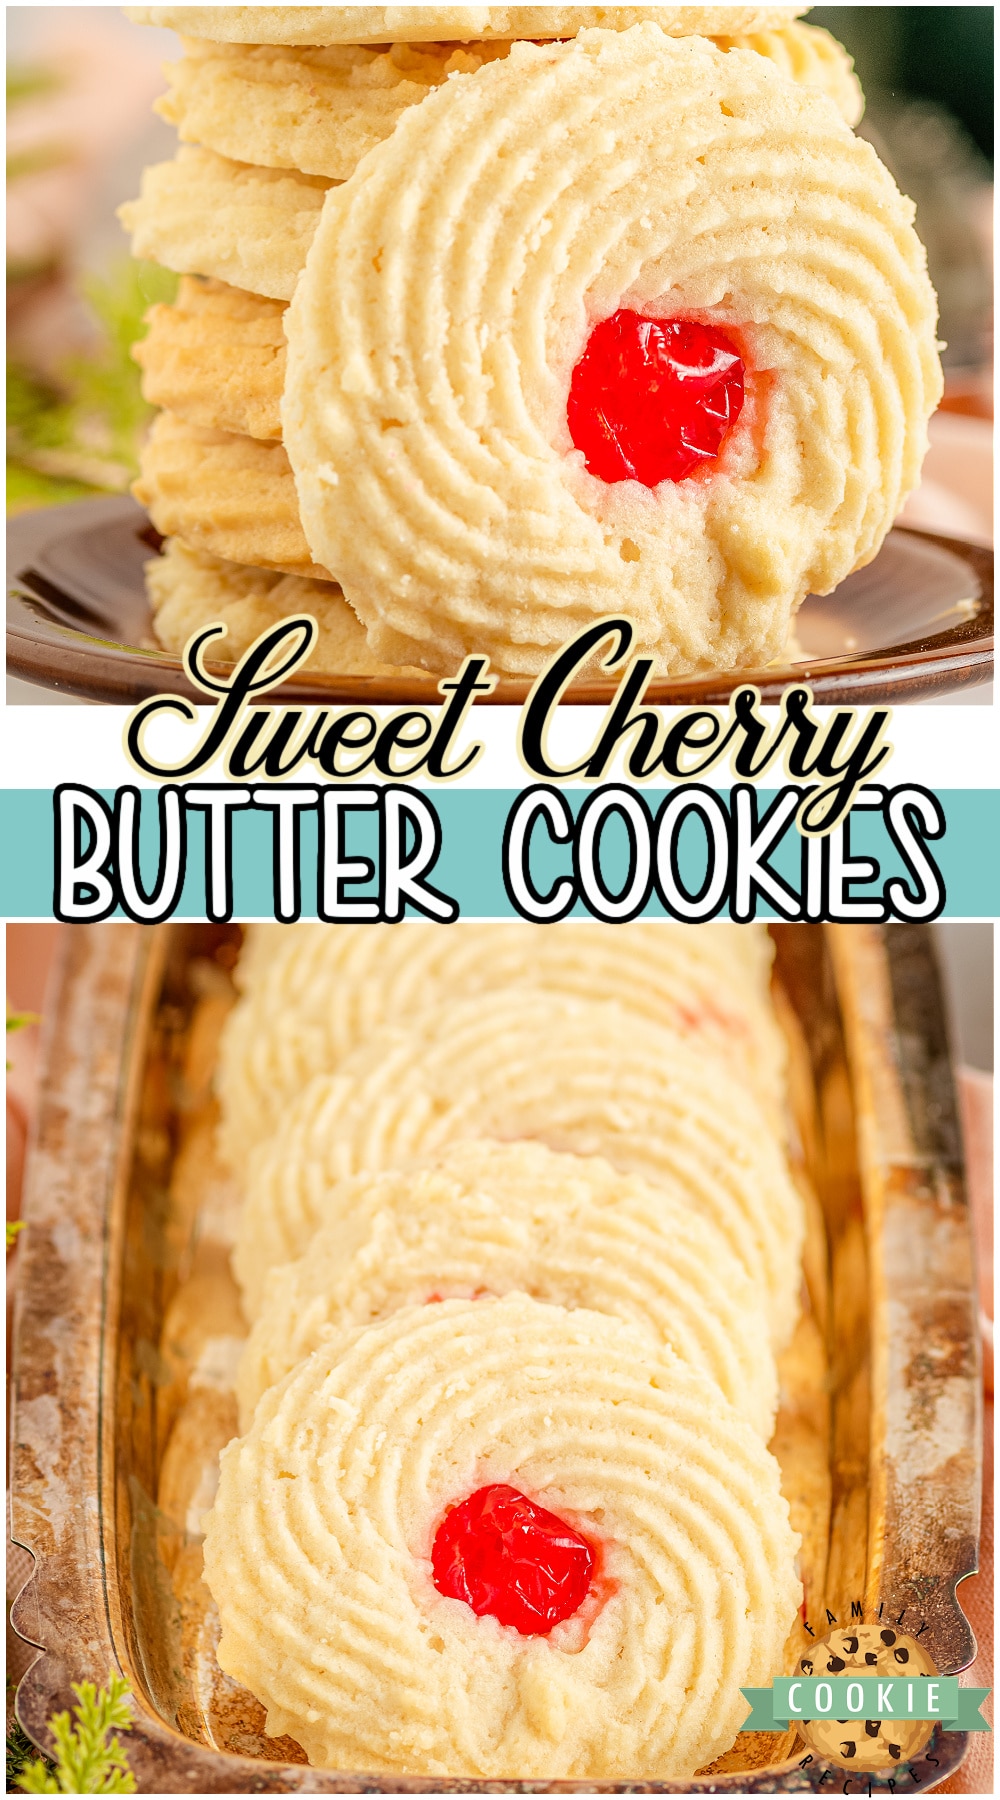 Cherry Butter Cookies made with classic ingredients & adorned with a simple cherry! Buttery crisp shortbread cookies topped with sweet cherries for a festive & delicious treat.  via @buttergirls